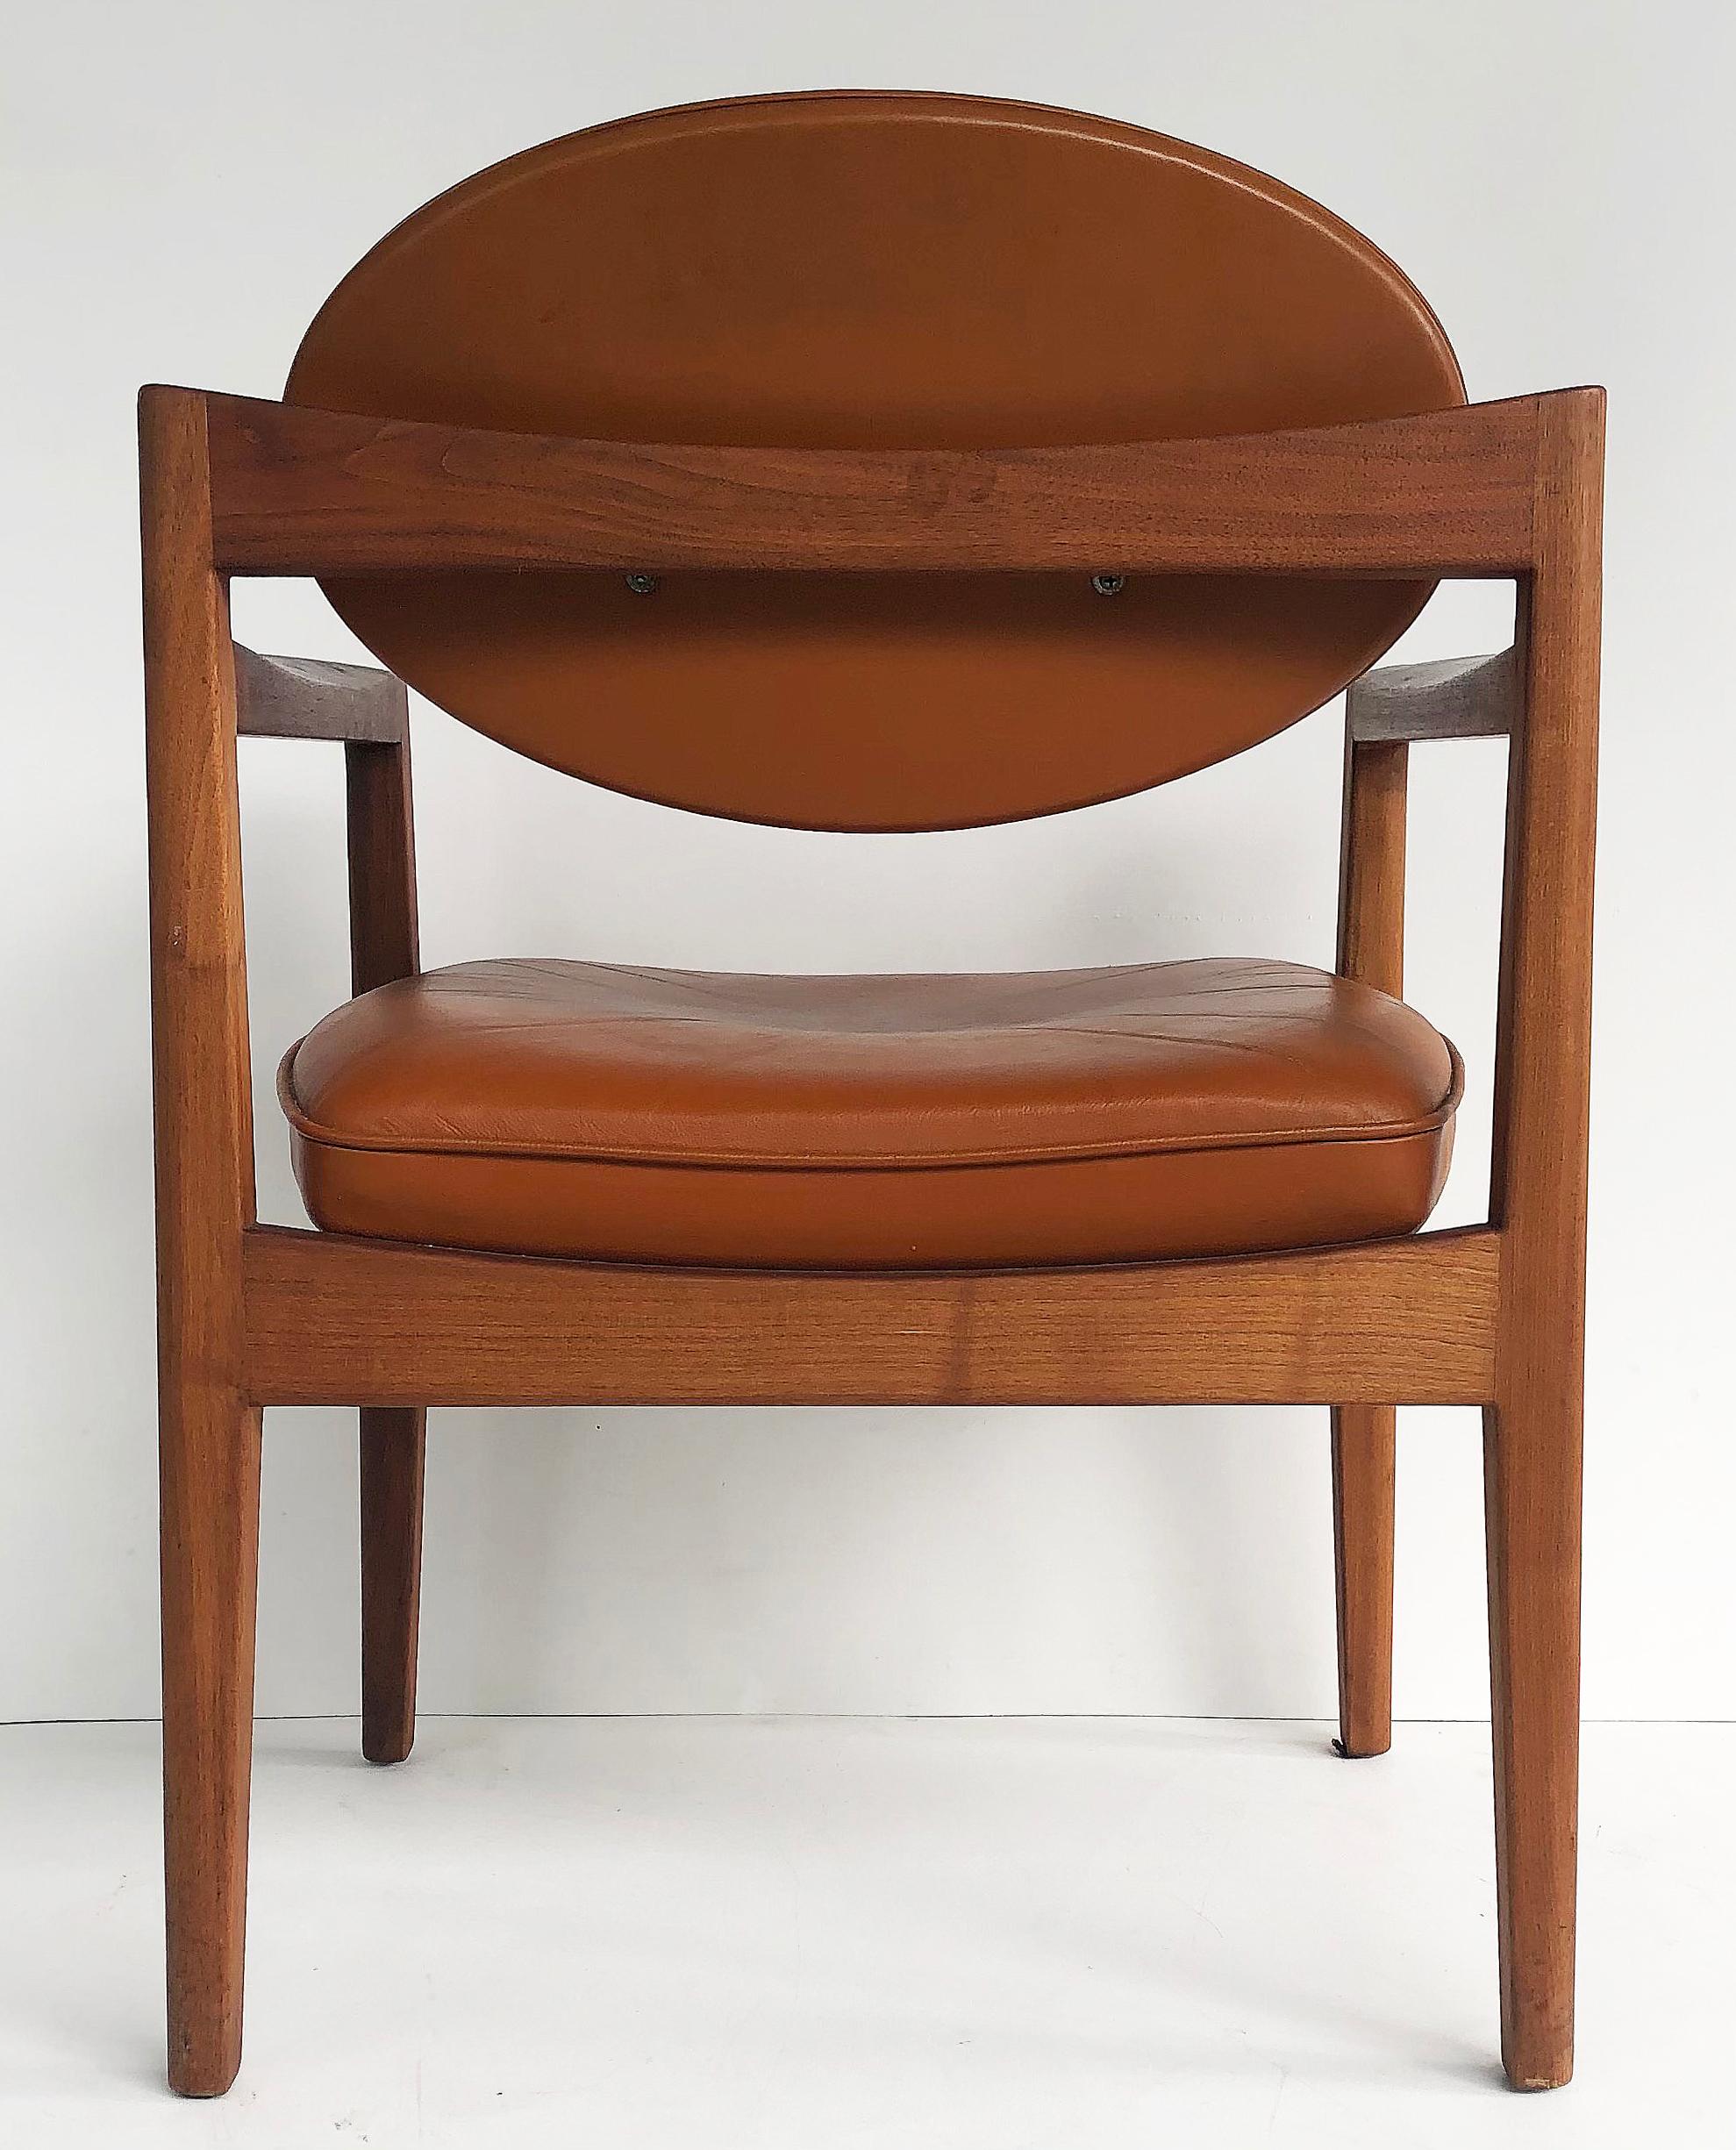 American Jens Risom Design Pair of Oiled Walnut & Leather Upholstered Armchairs, c.1965 For Sale